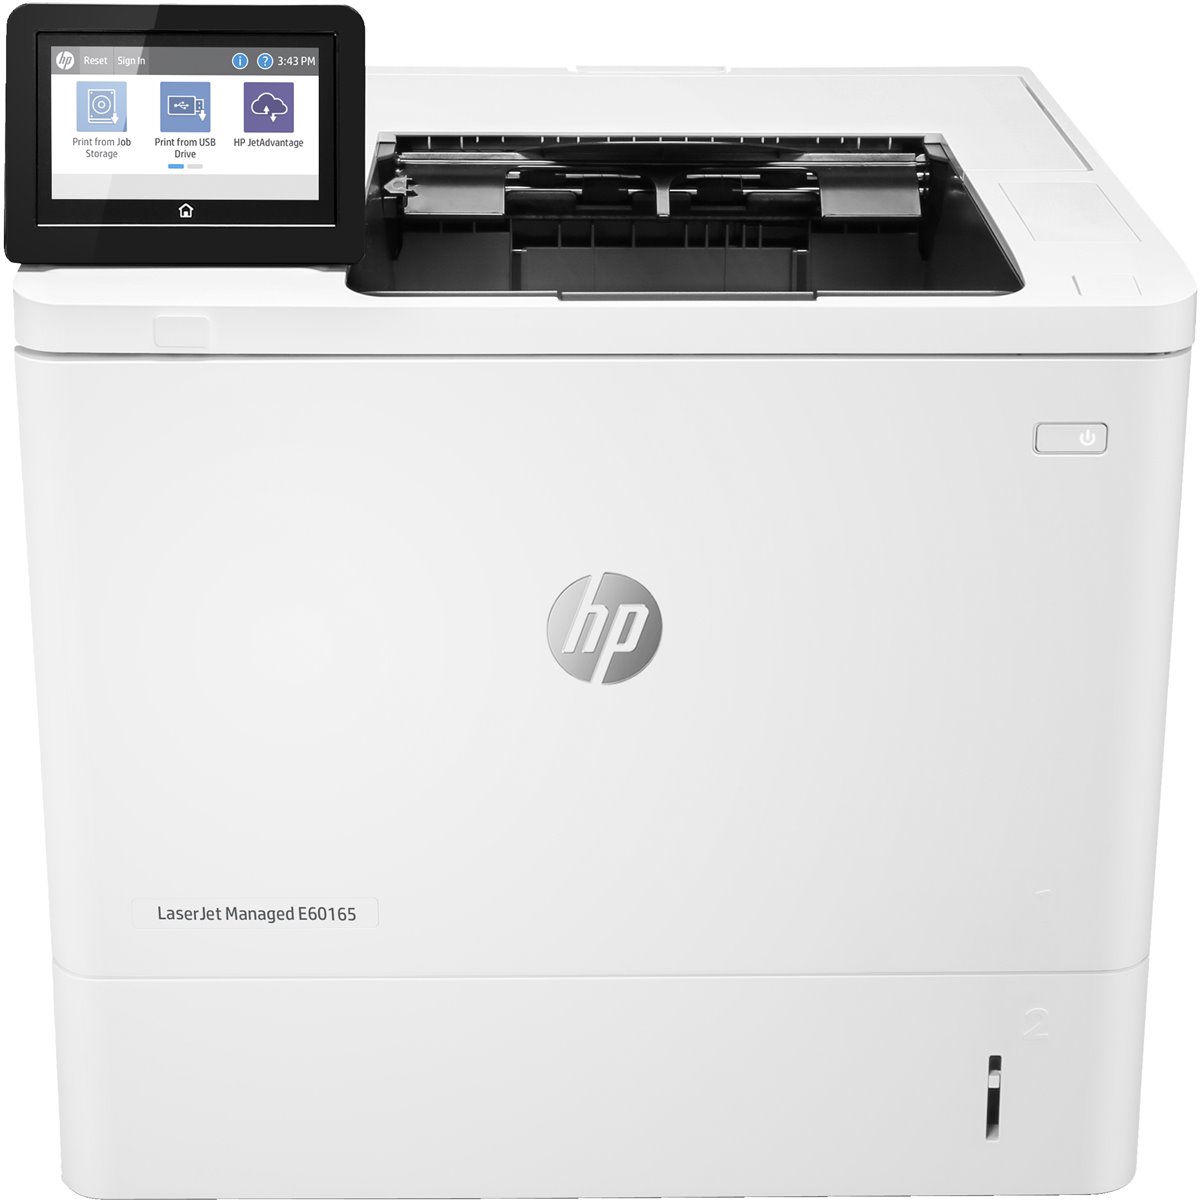 HP LaserJet Managed E60165dn - Print - Front-facing USB printing Two-sided printing - Laser - 1200 x 1200 DPI - 61 ppm - Duplex 